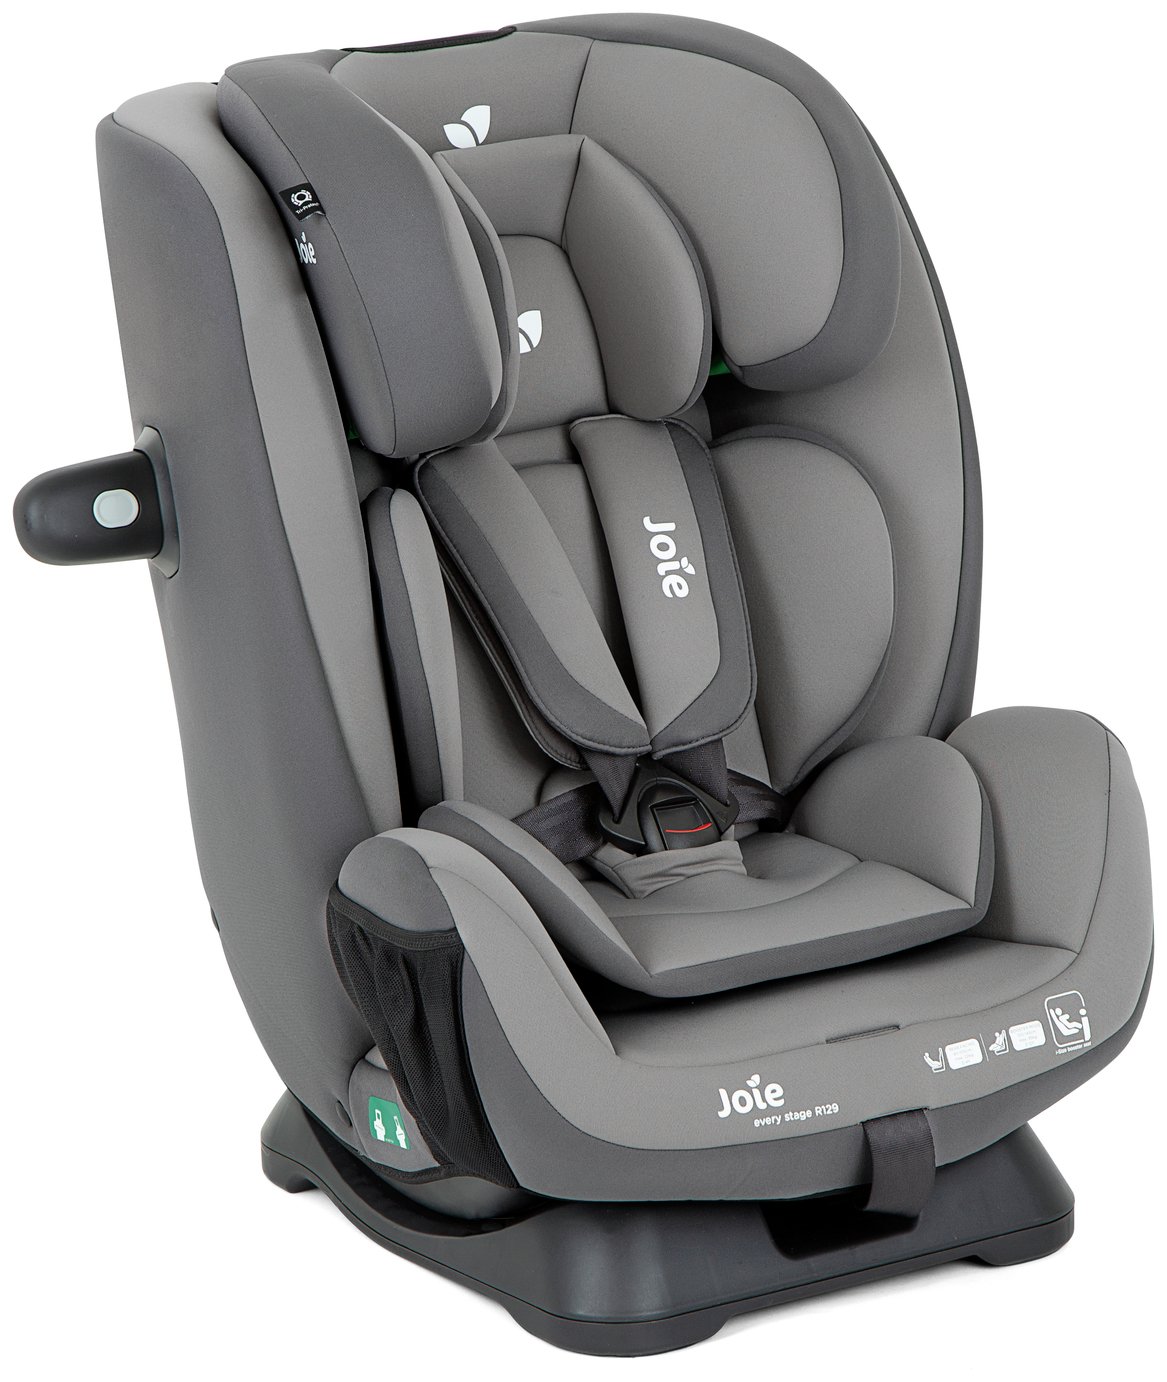 Joie Every Stage R129 Car Seat Cobblestone